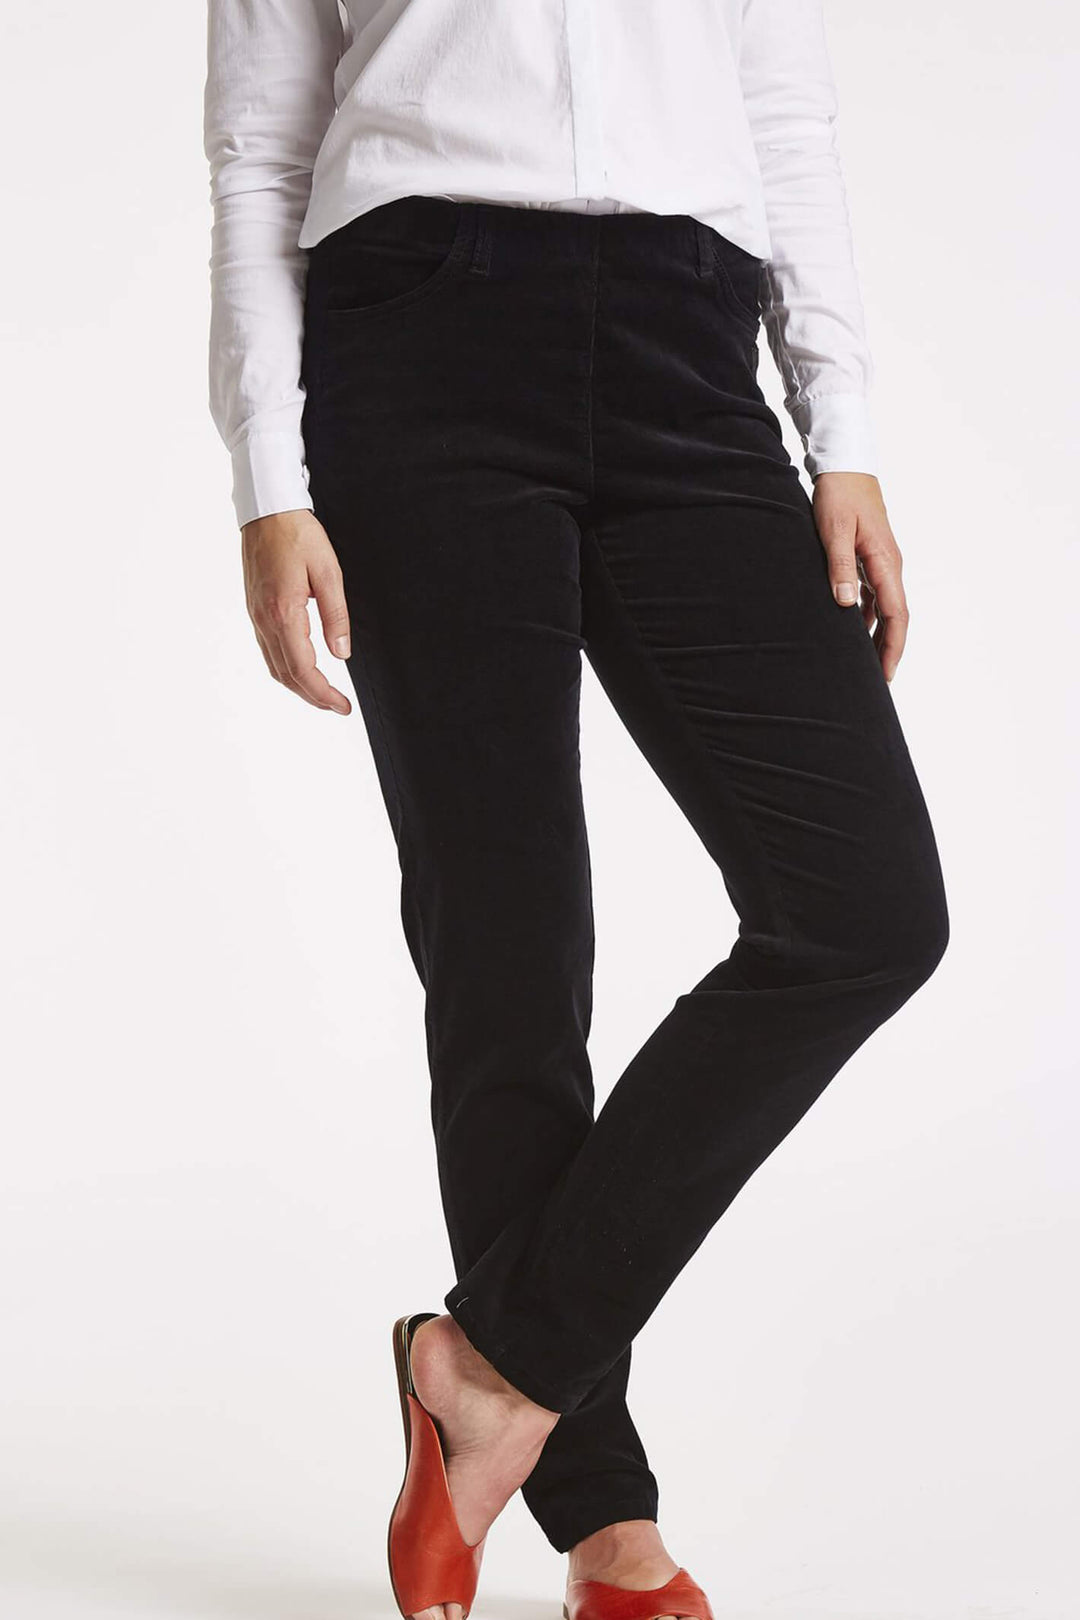 LauRie 23218 99198 Kelly Black Corduroy Trousers - Shirley Allum Boutique